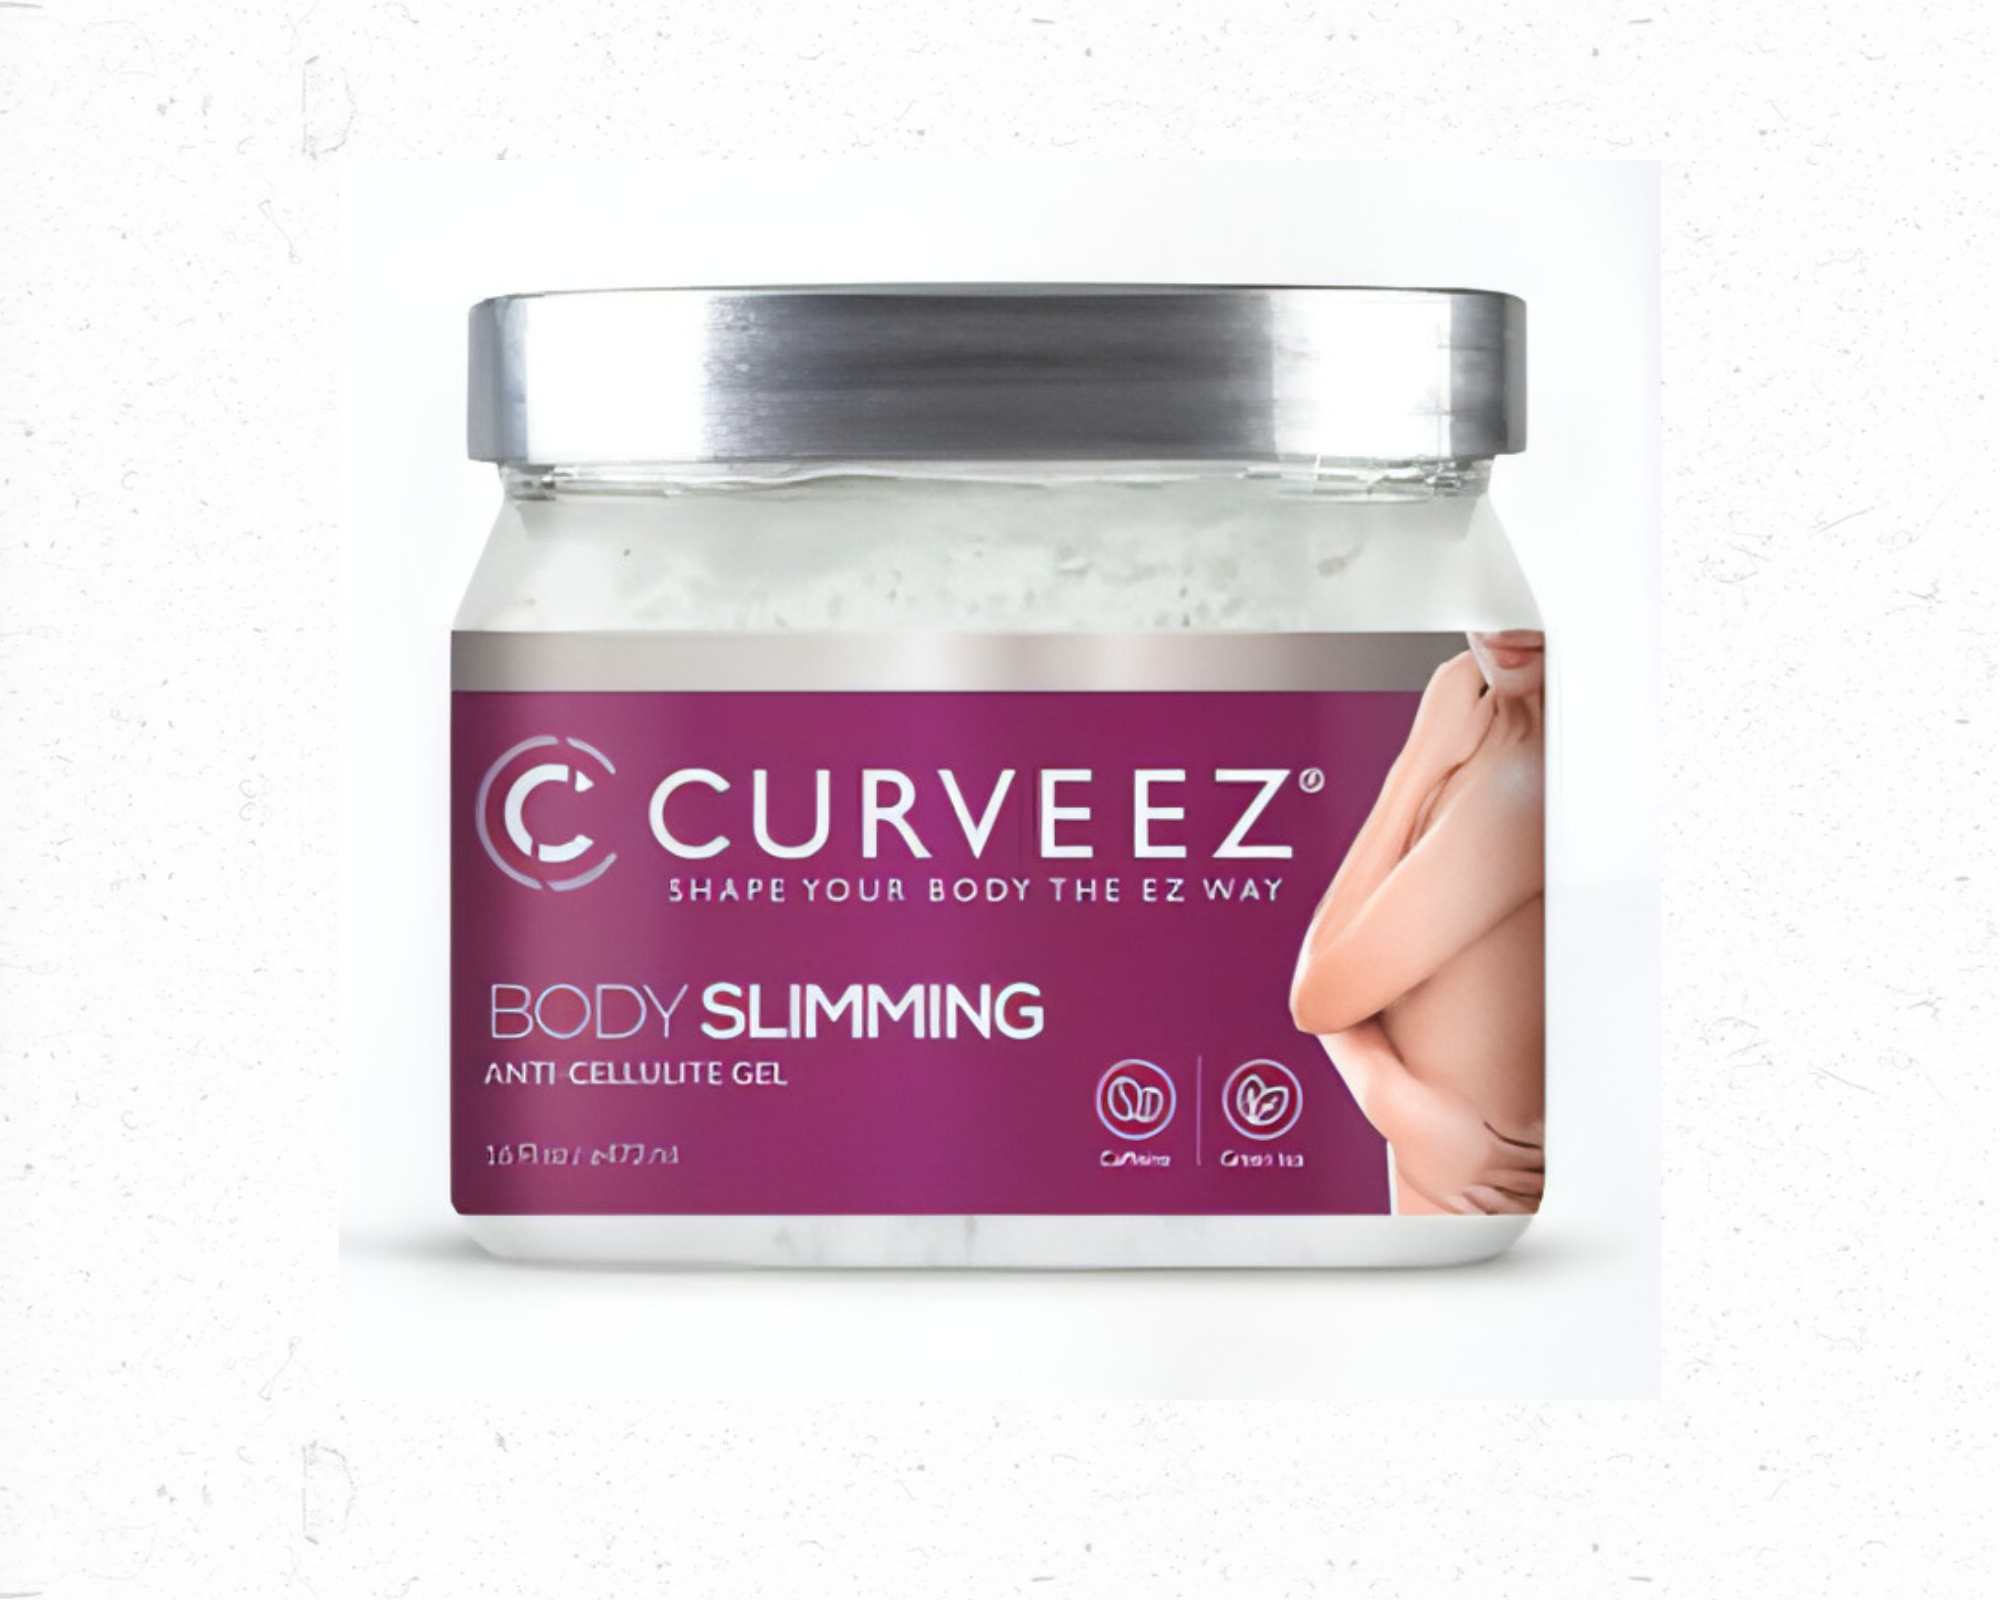 Enhance Your Body Confidence with Body Slimming Anti-Cellulite Gel